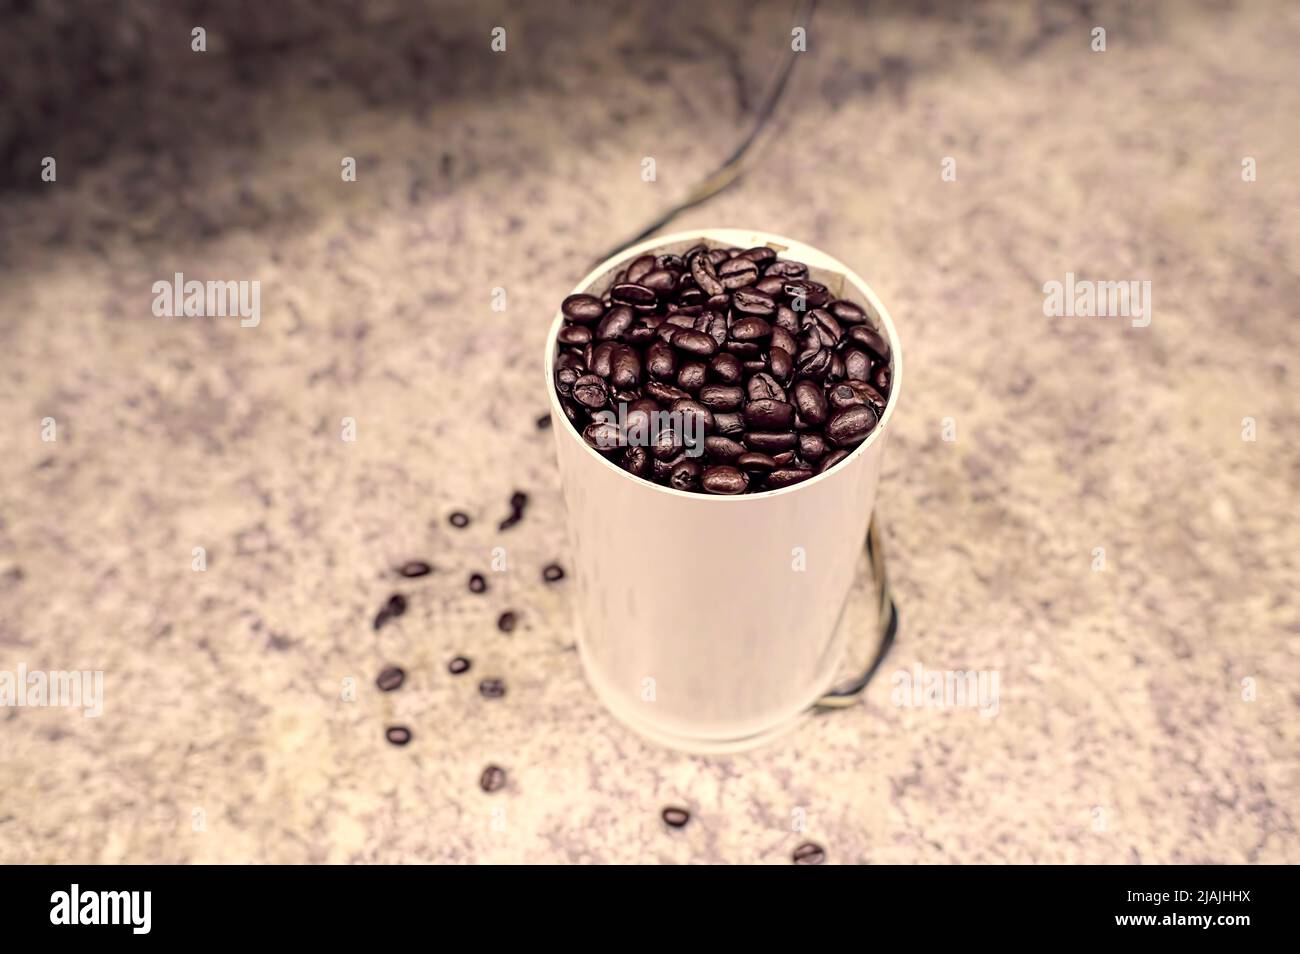 Whole coffee beans in a grinder on a kitchen countertop. Stock Photo